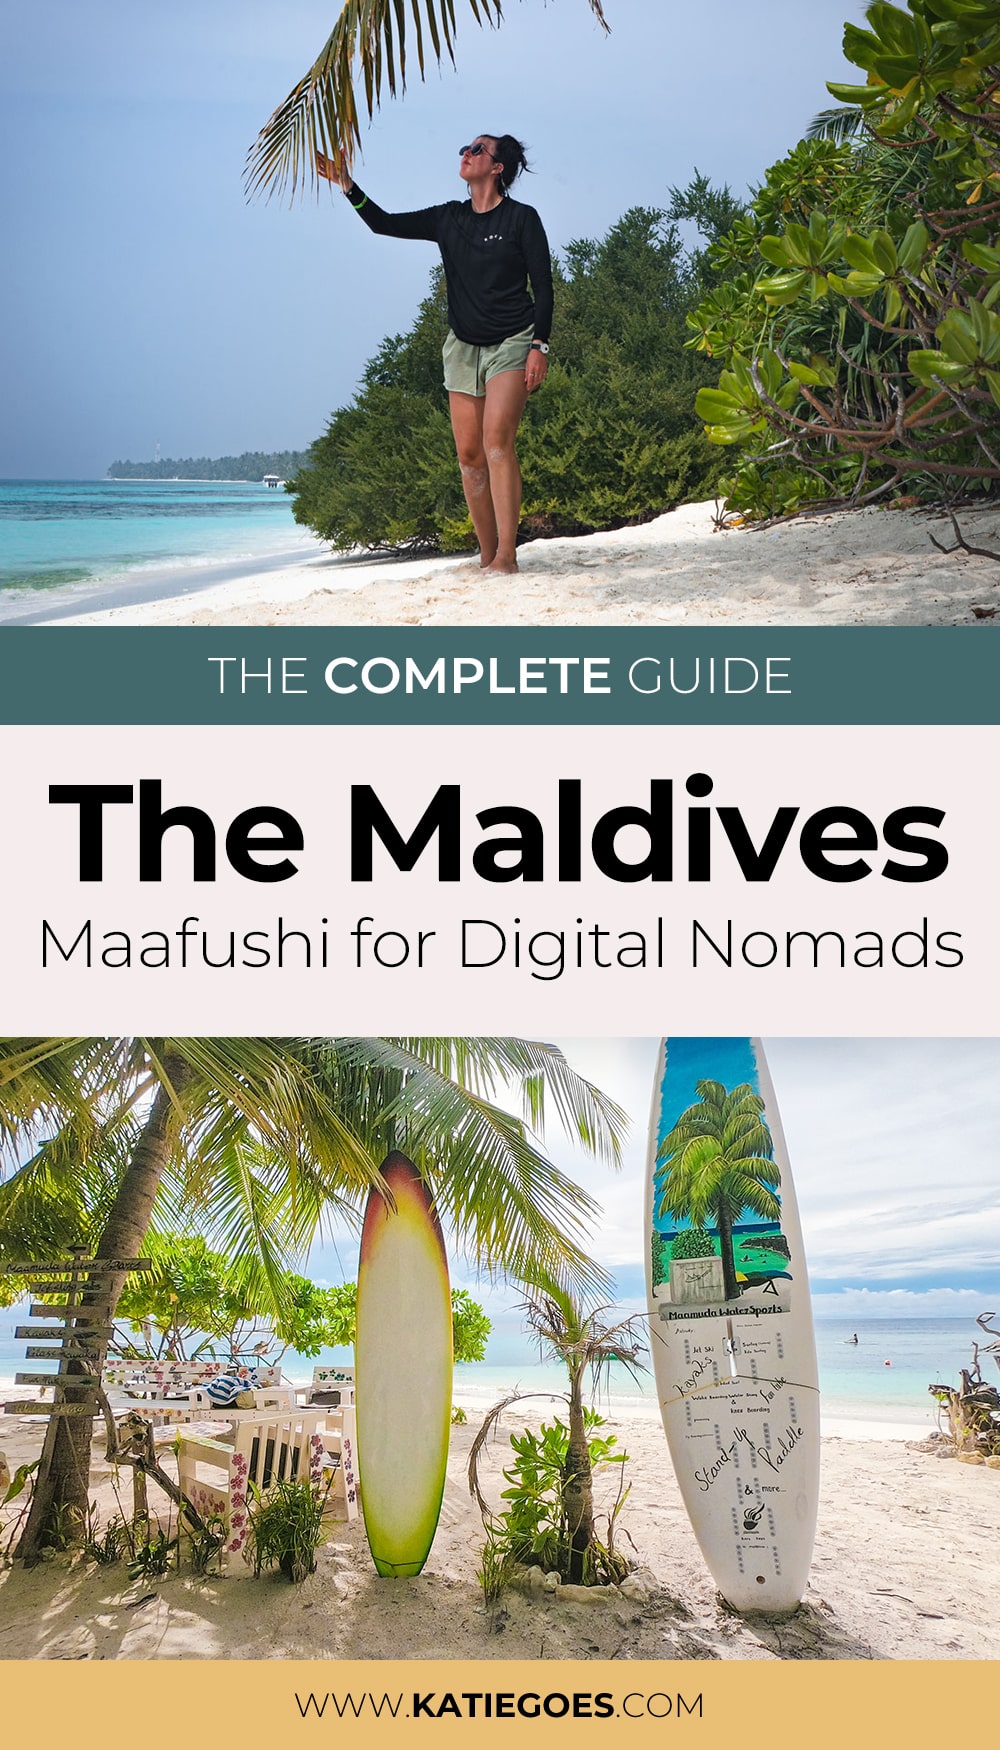 The Complete Guide to The Maldives: Maafushi for Digital Nomads